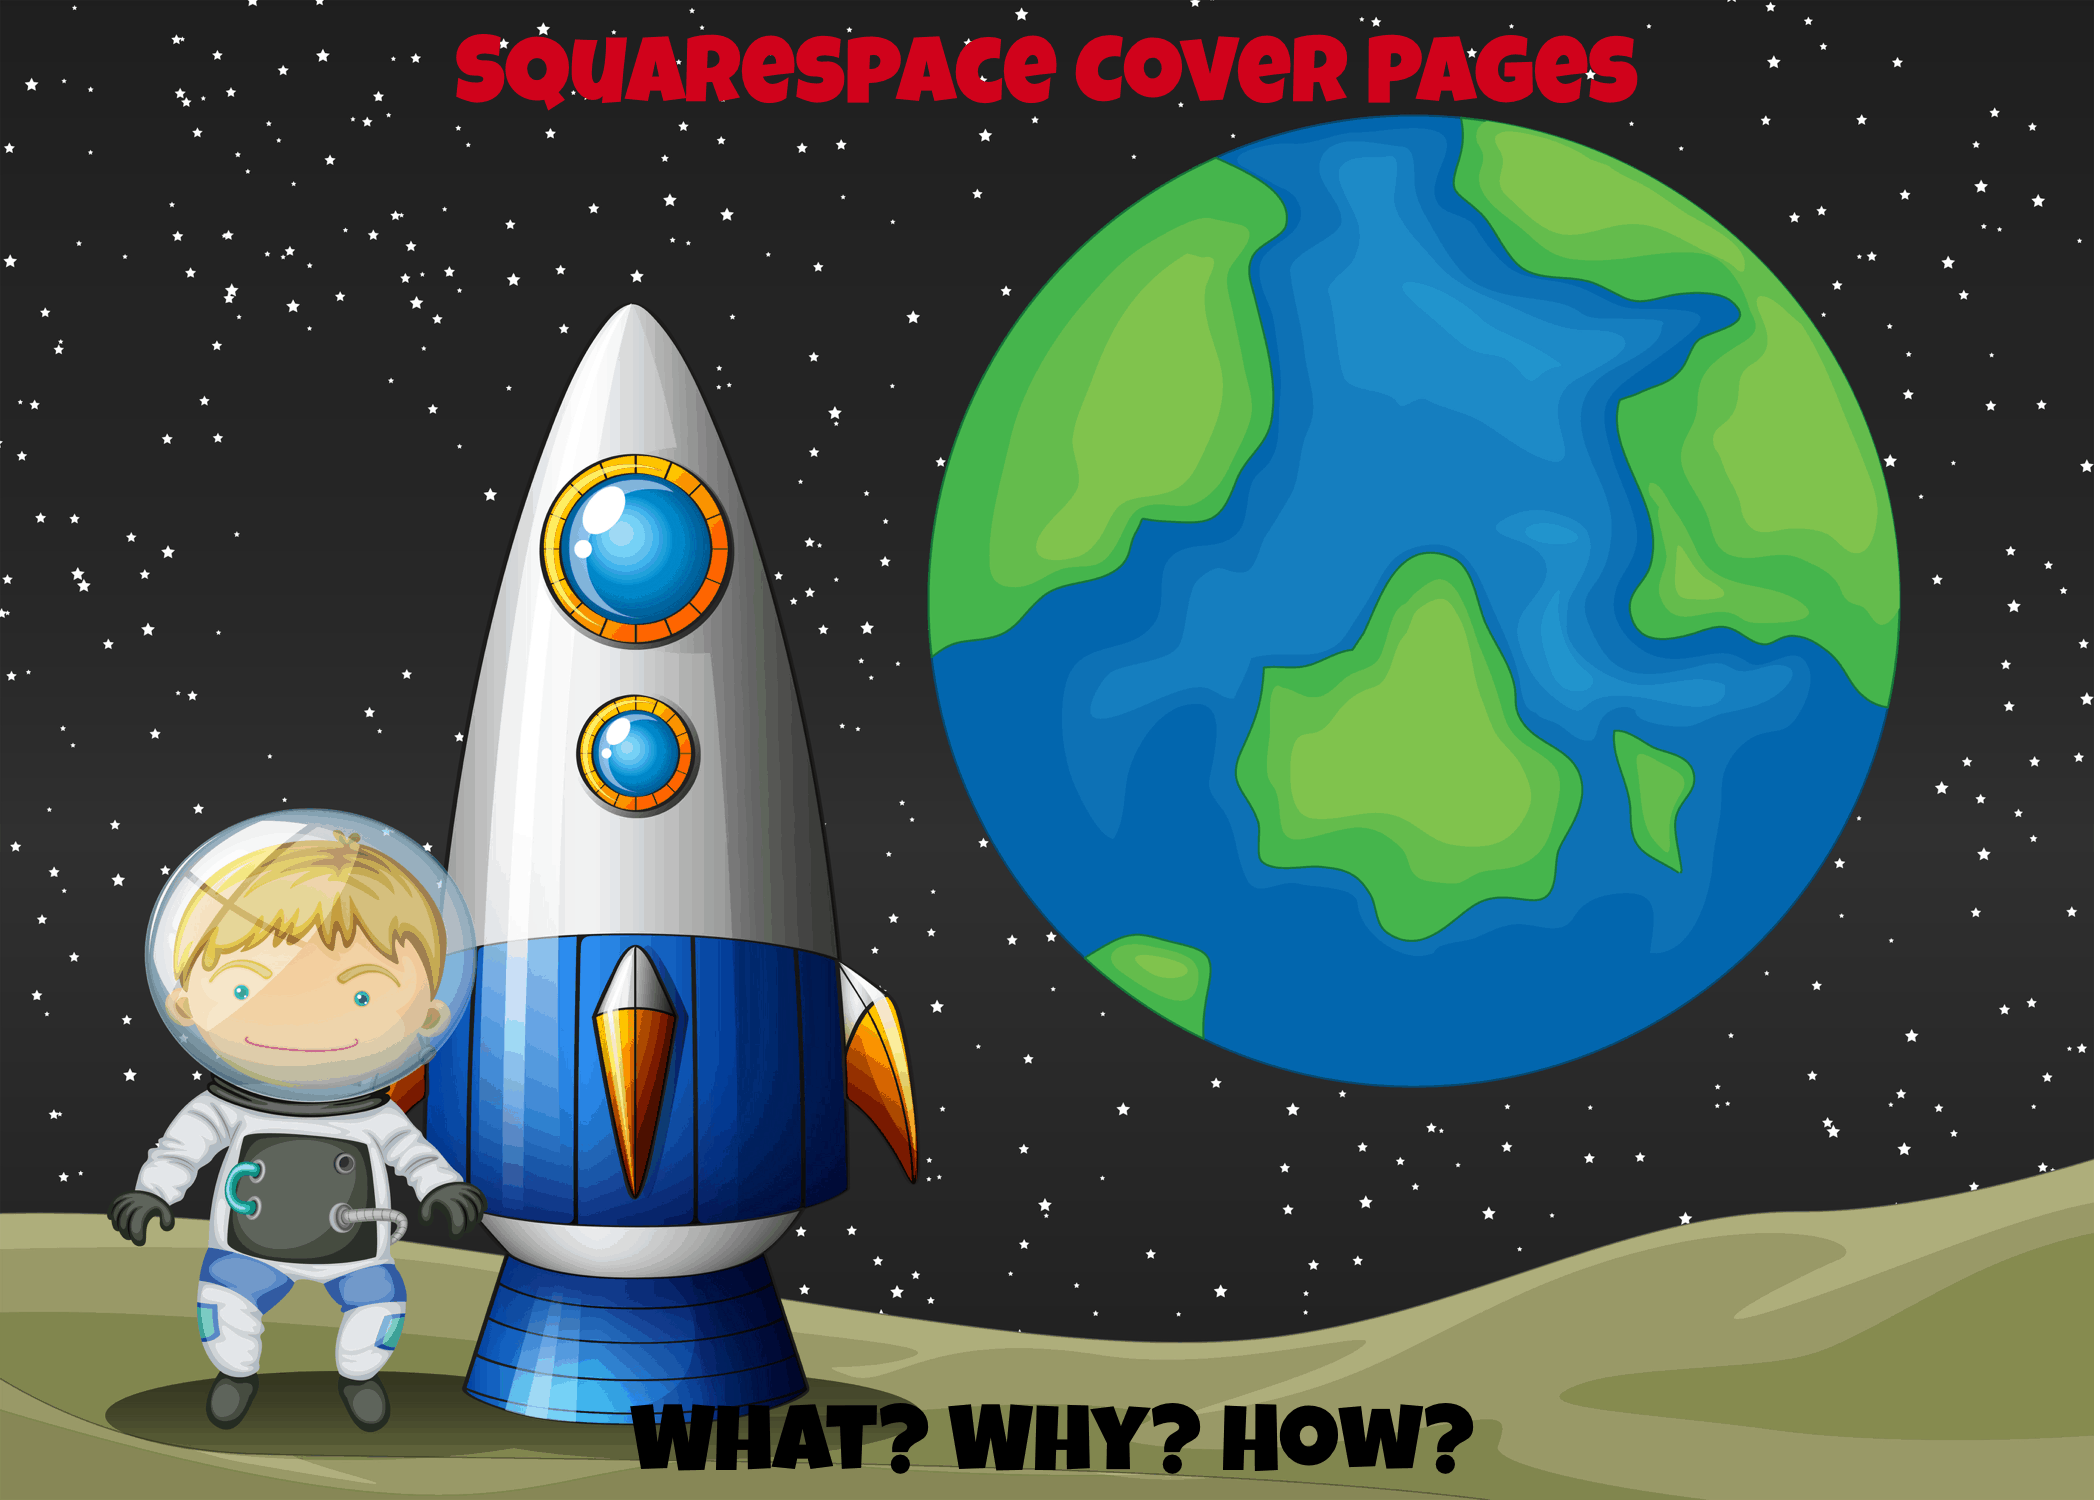 squarespace cover pages